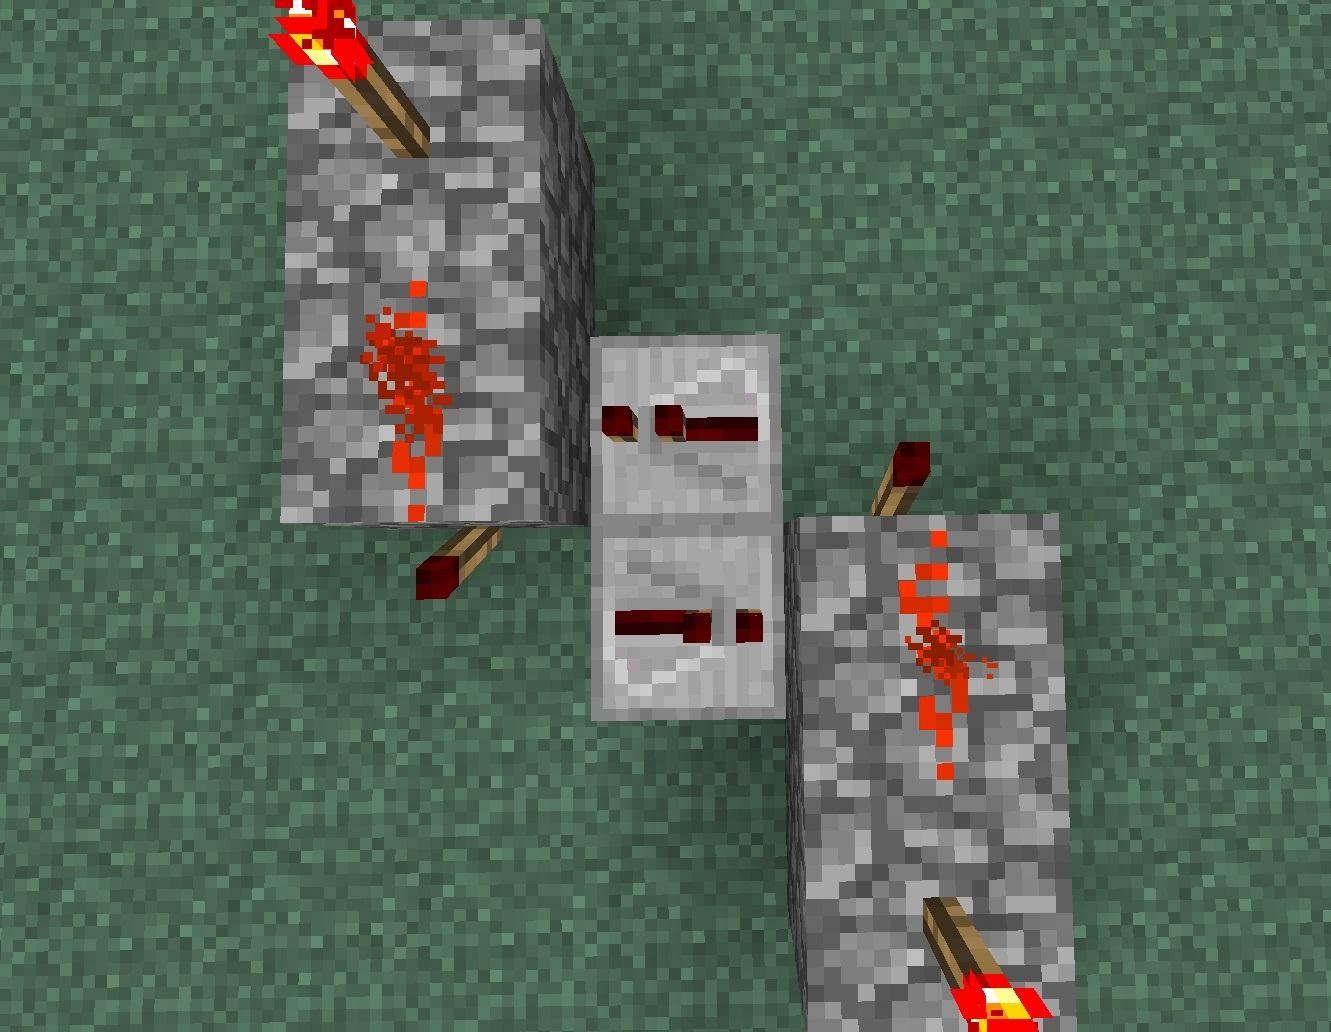 How to Send Redstone Signals Both Ways with This Two-Way Repeater